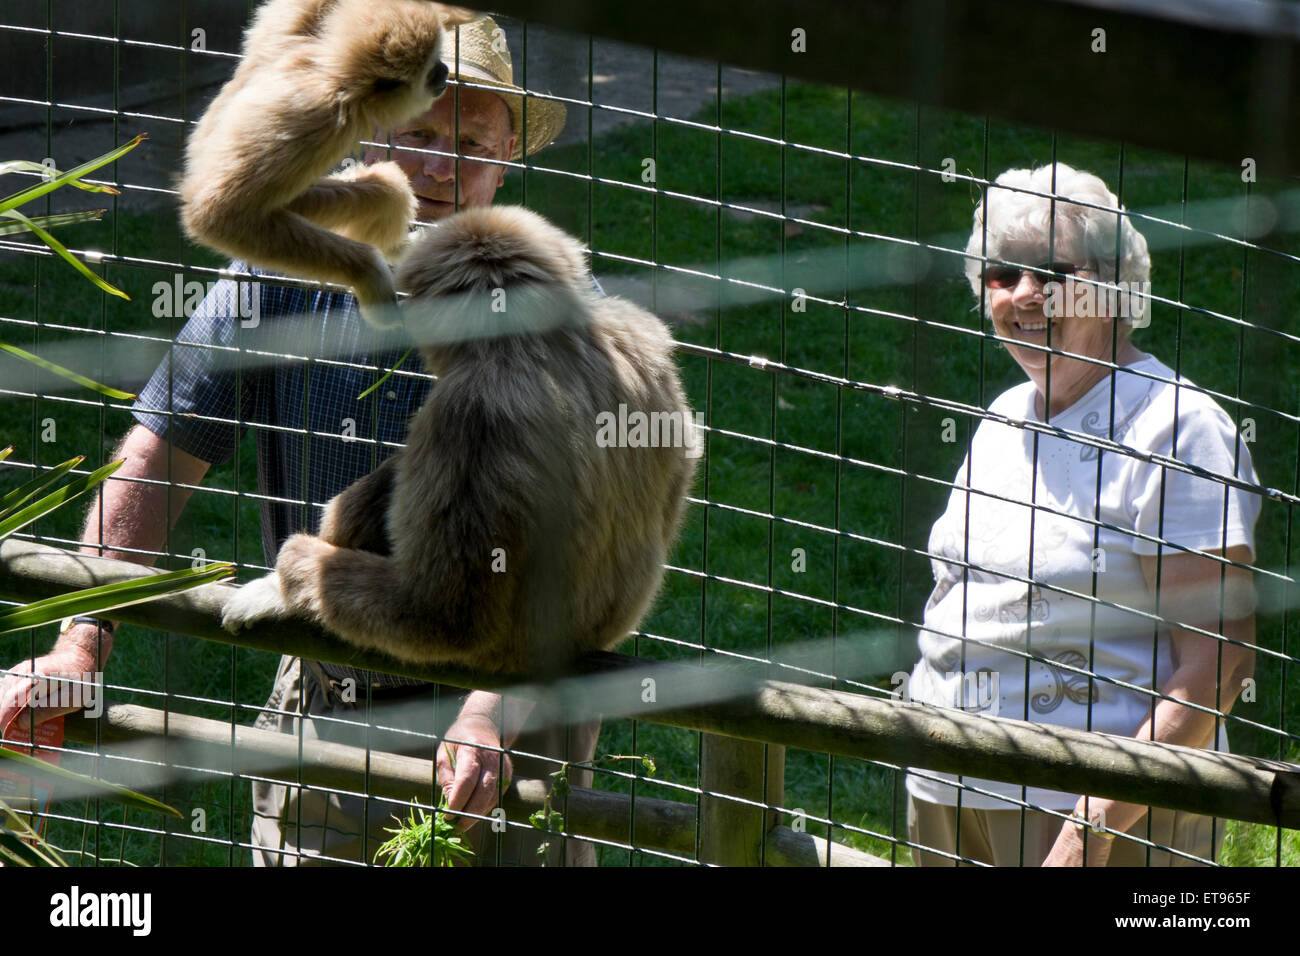 Visitor looking at monkey in zoo cage Stock Photo